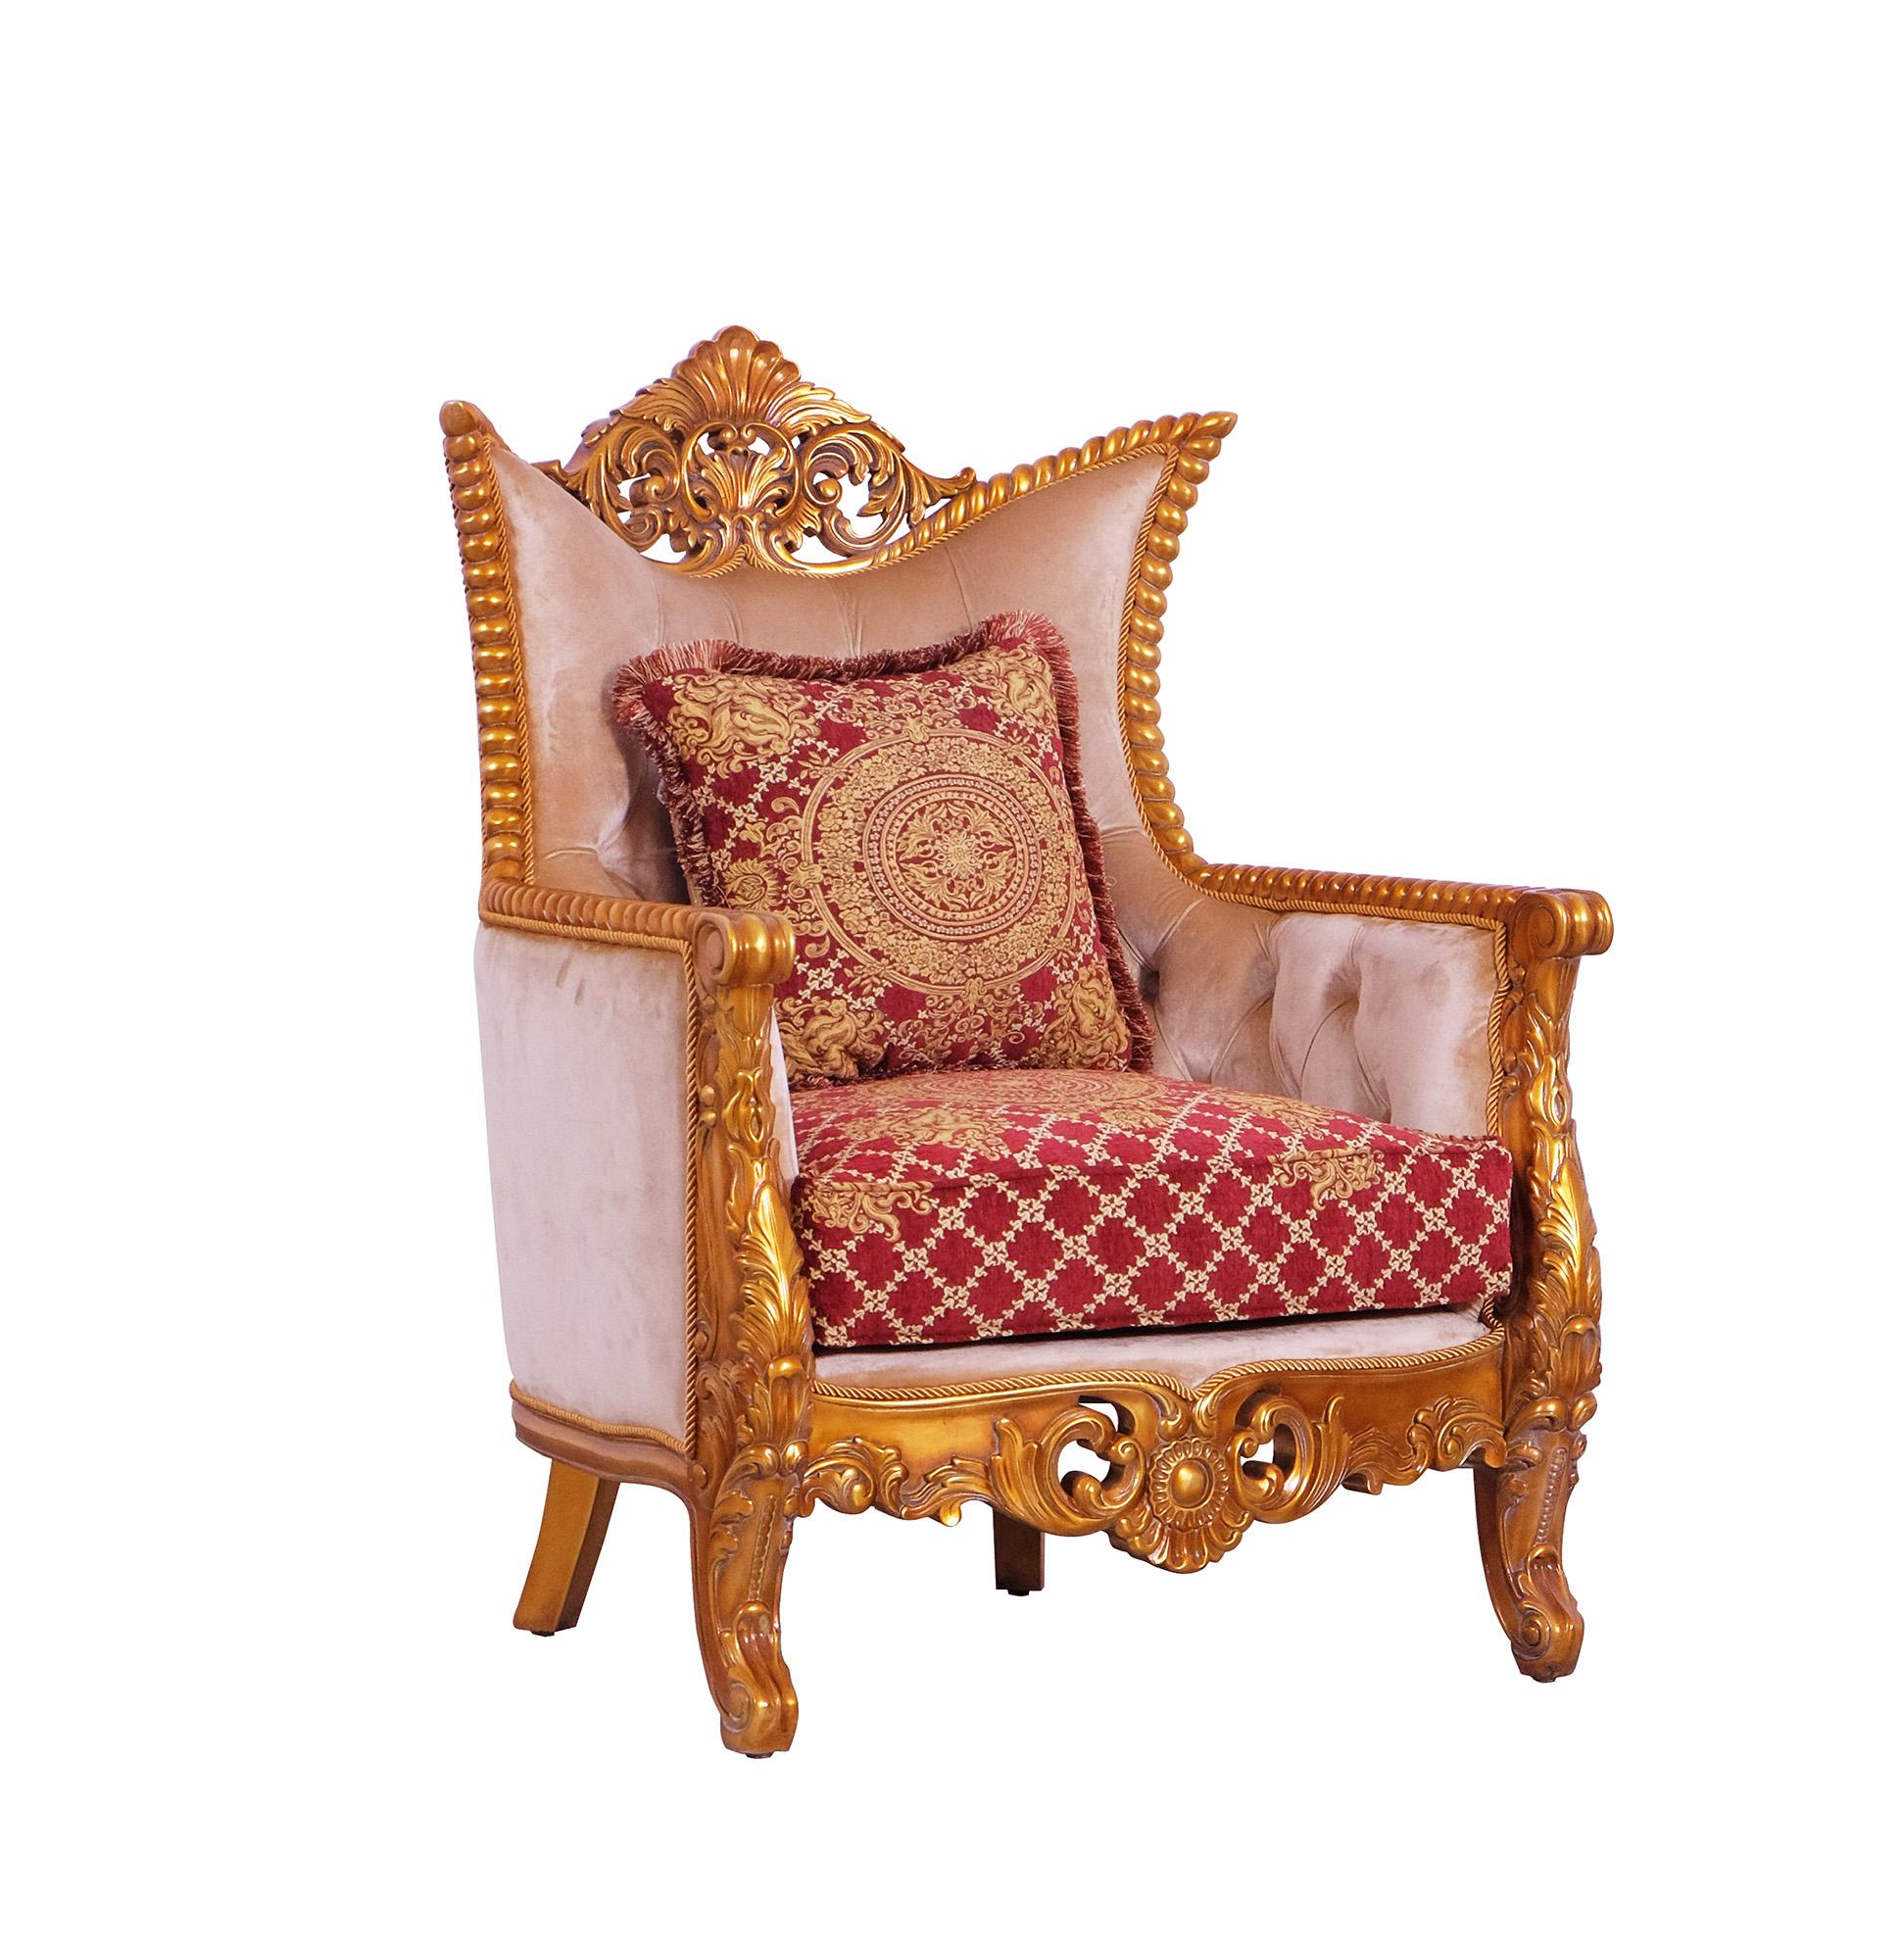 Classic, Traditional Arm Chair MODIGLIANI 31058-C in Red, Gold Fabric